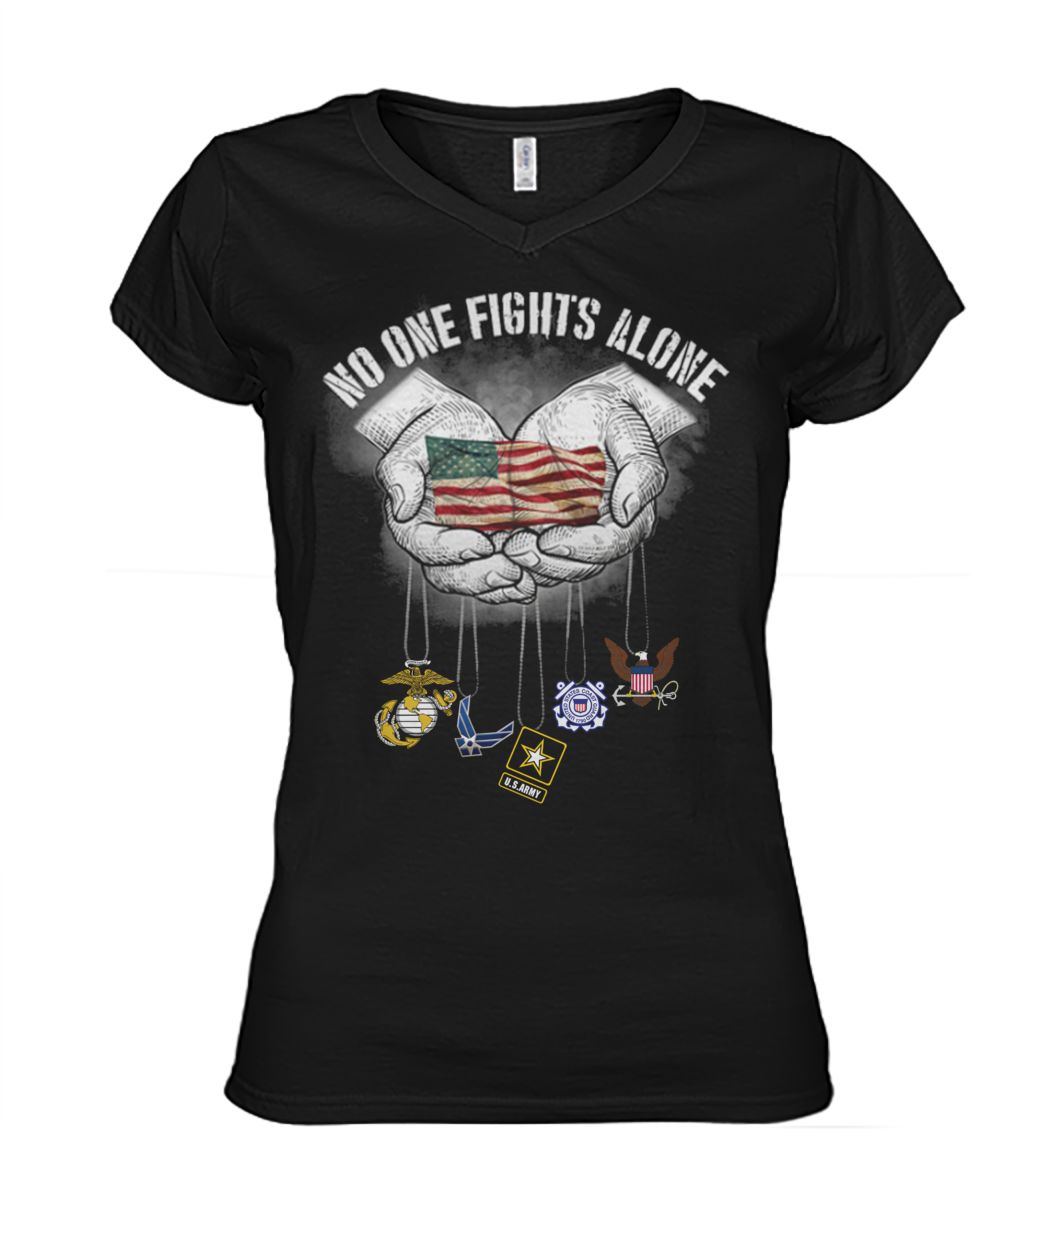 No one fights alone american flag in hands women's v-neck